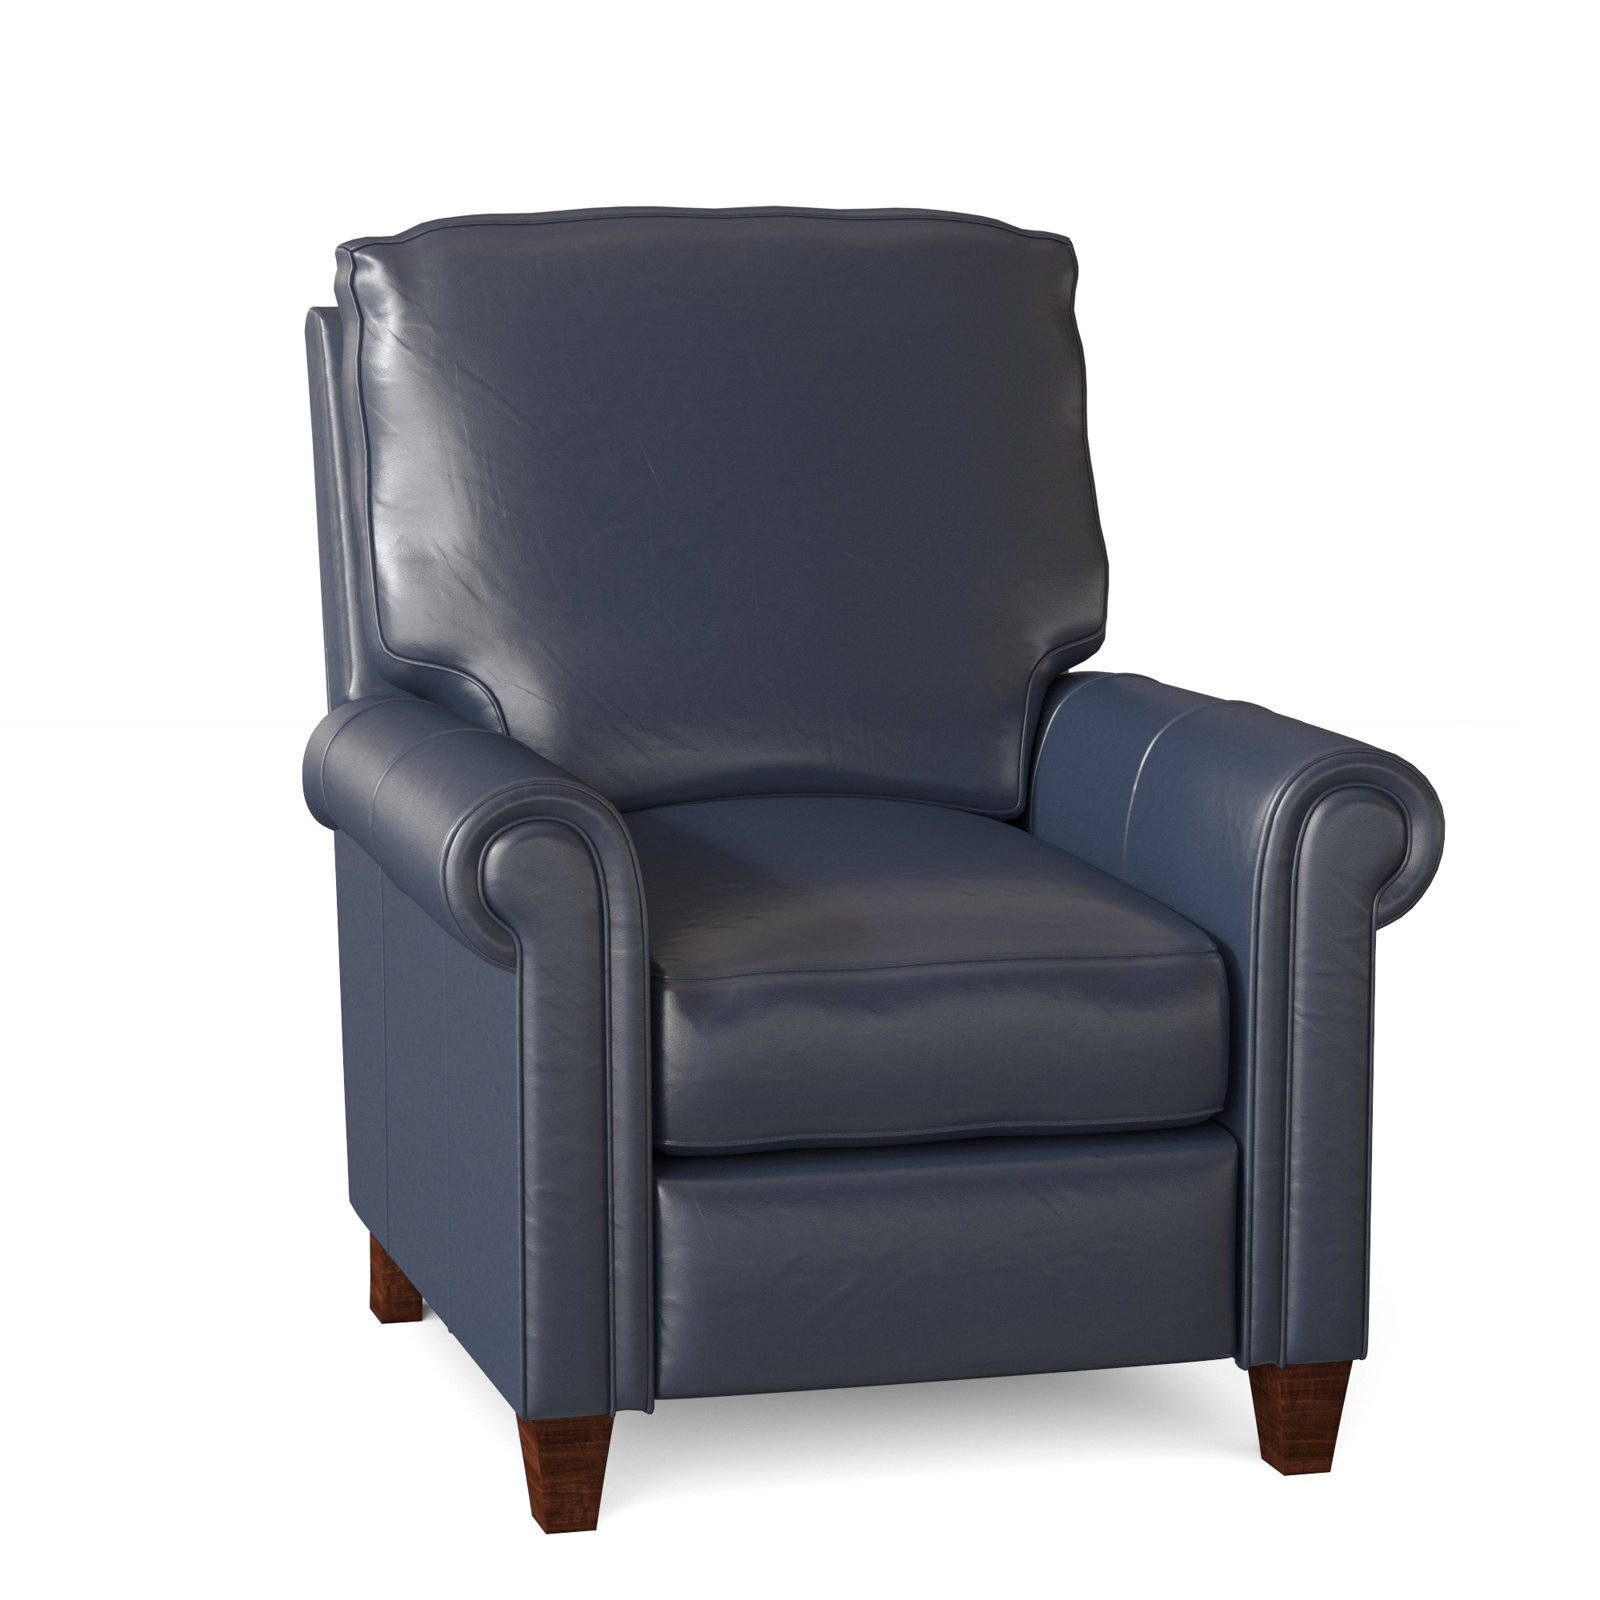 Blue leather recliner with decorative arms